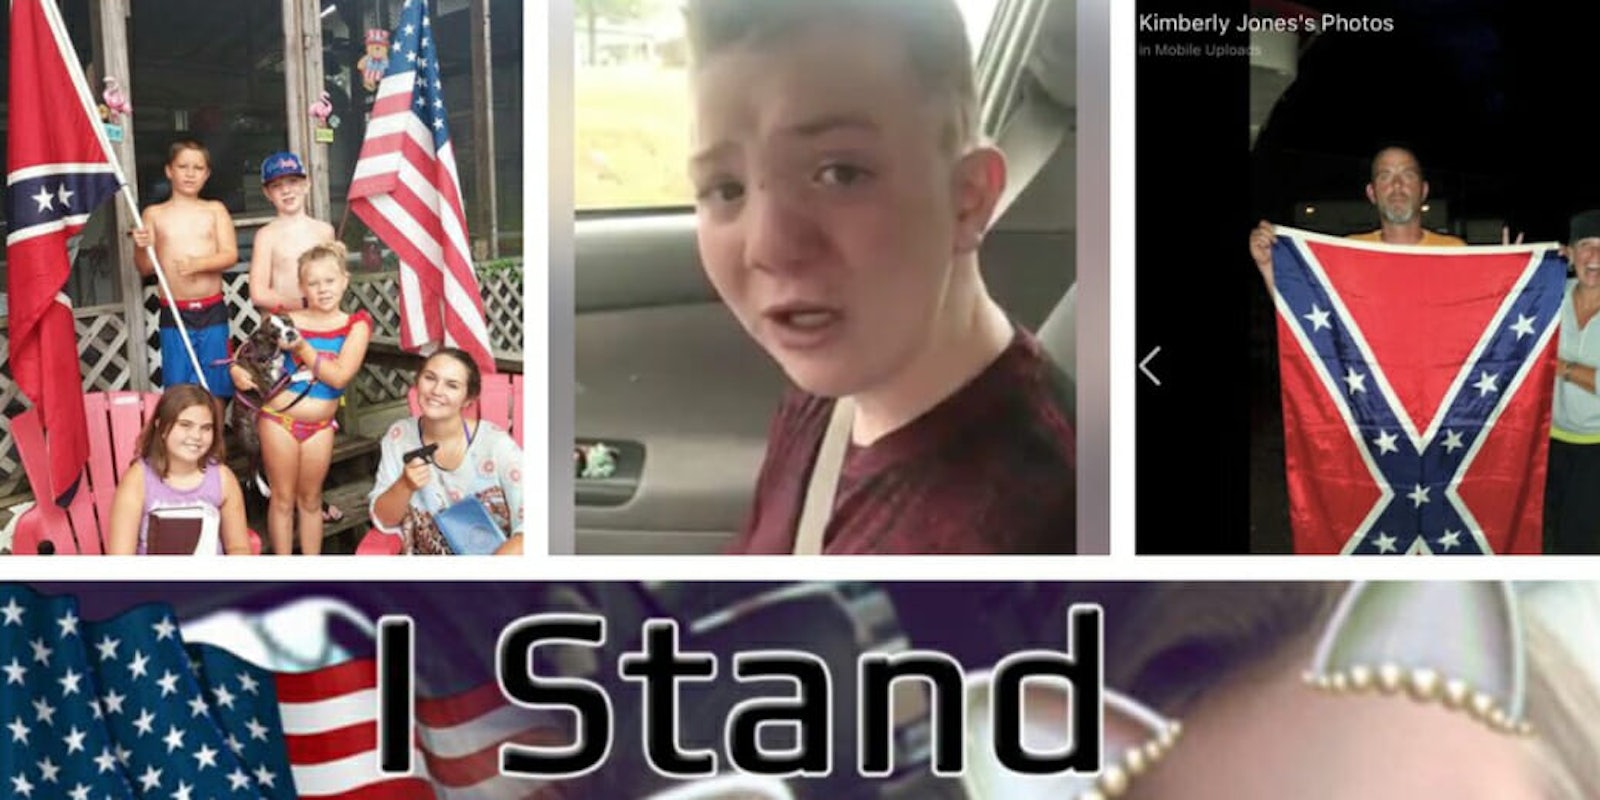 From anti-bullying messages to racist photos, the Keaton Jones saga has taken the internet by storm.